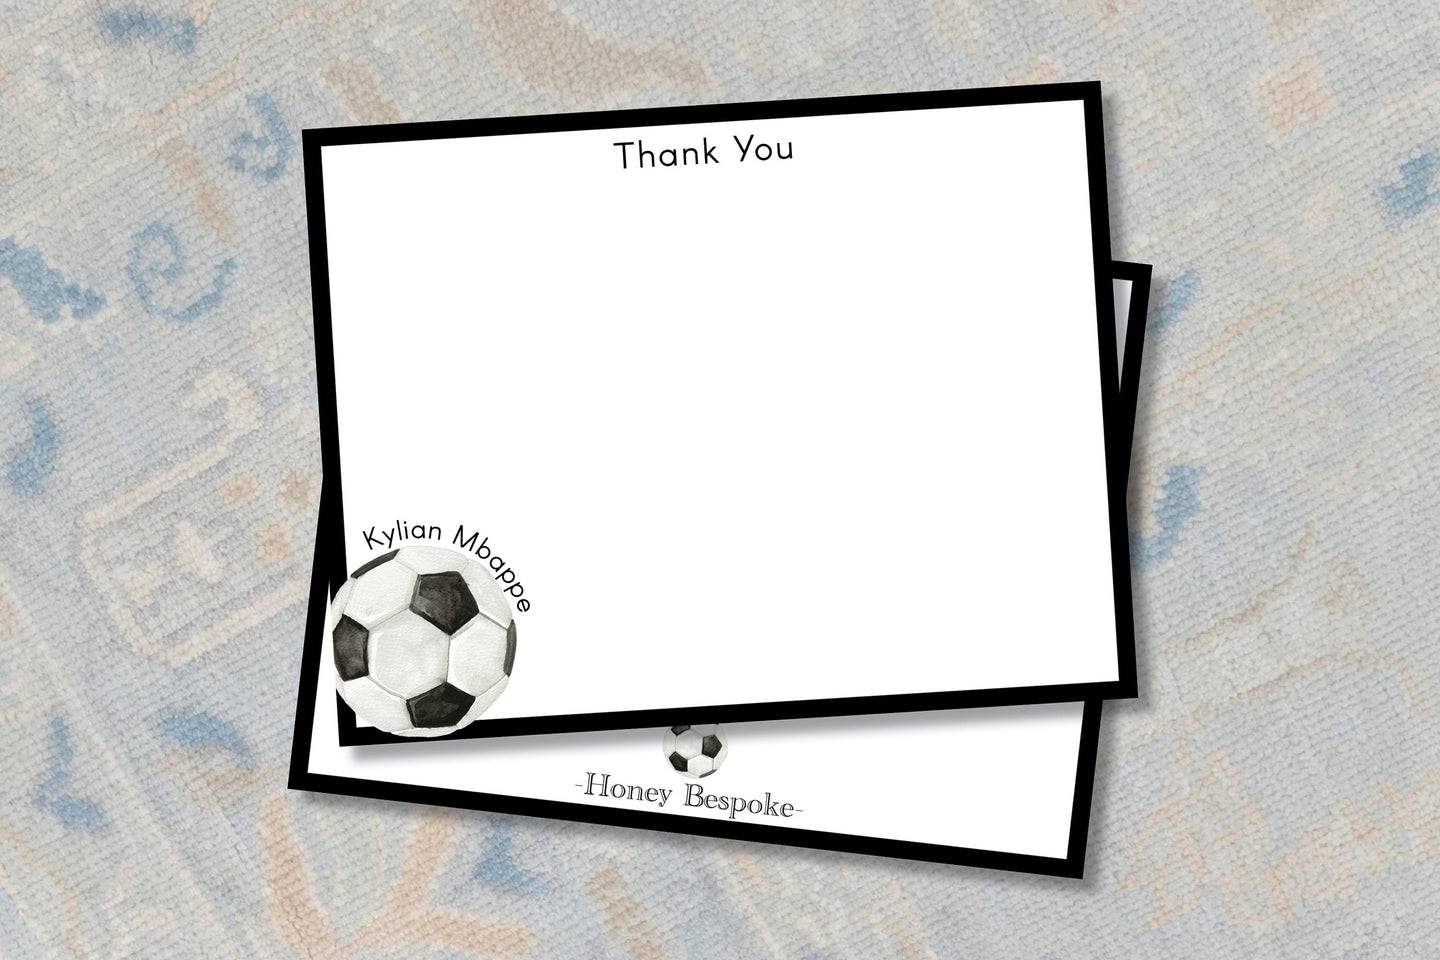 Personalized Soccer Stationery / Soccer Gifts / Soccer Player Gifts / Soccer Thank You Cards / Preppy Stationery / Thank you Notes